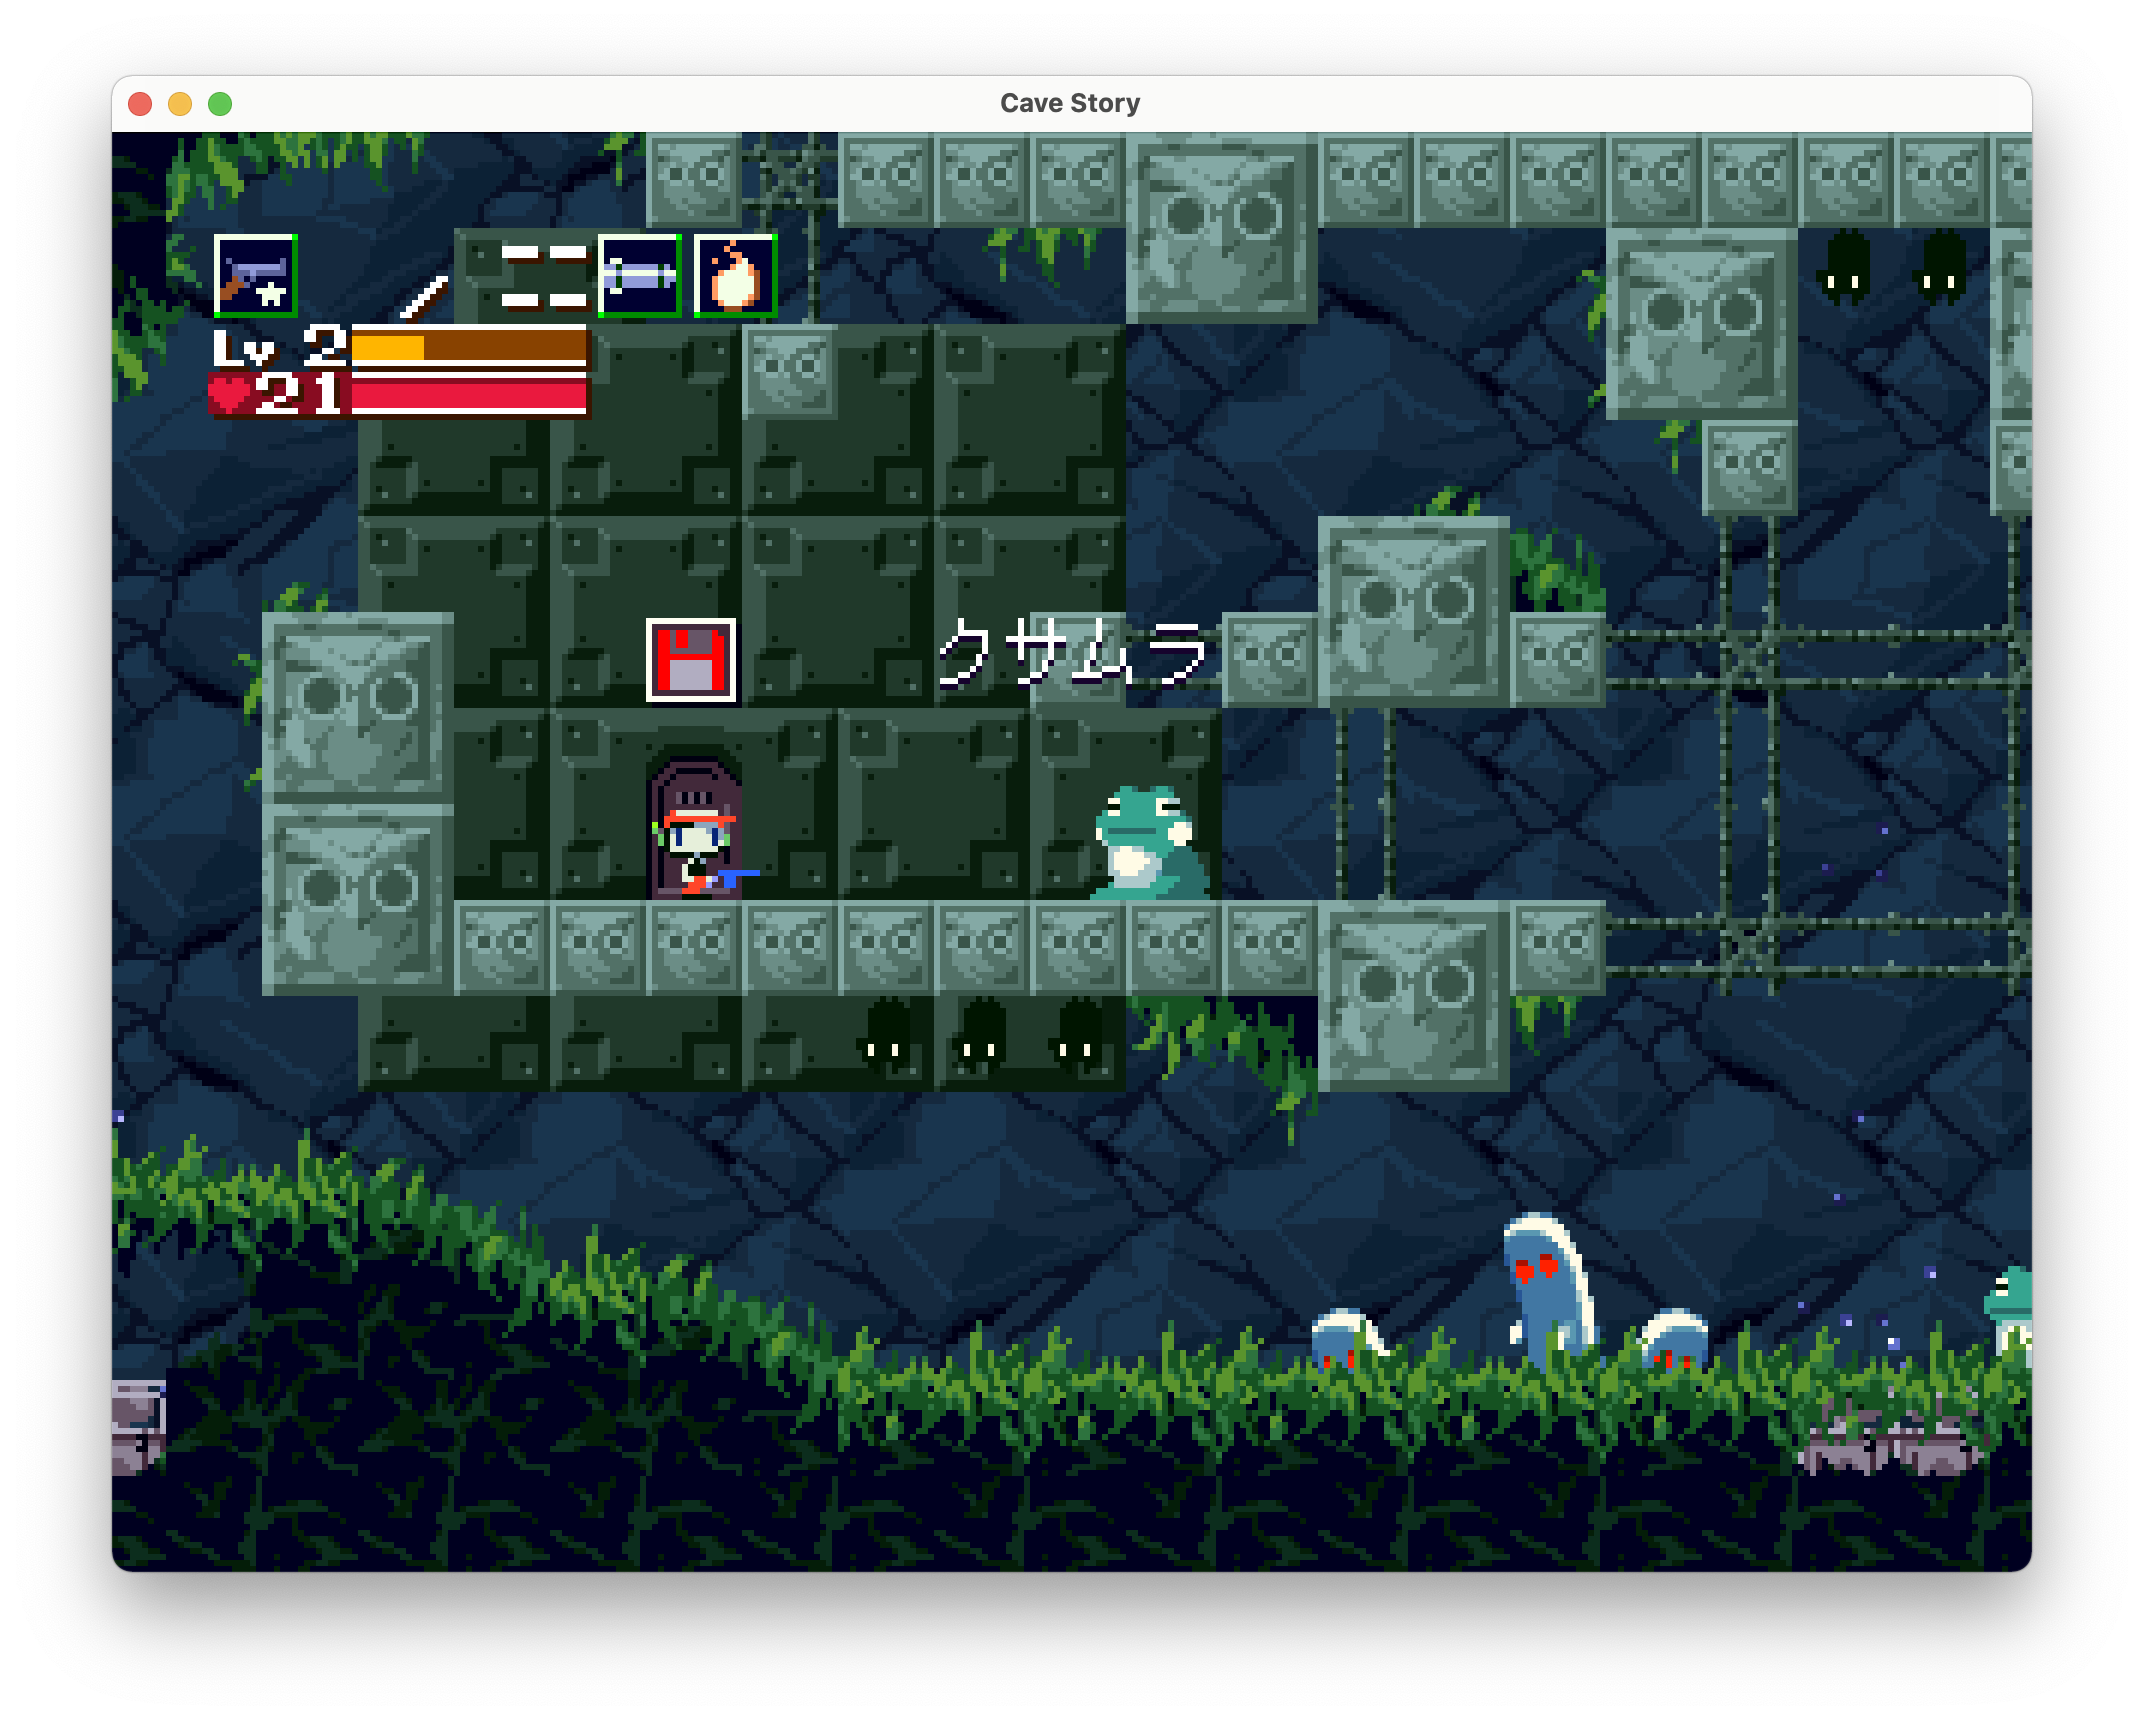 a screenshot of the game Cave Story, with japanese text. A large frog is approaching the player, a small figure in a hat